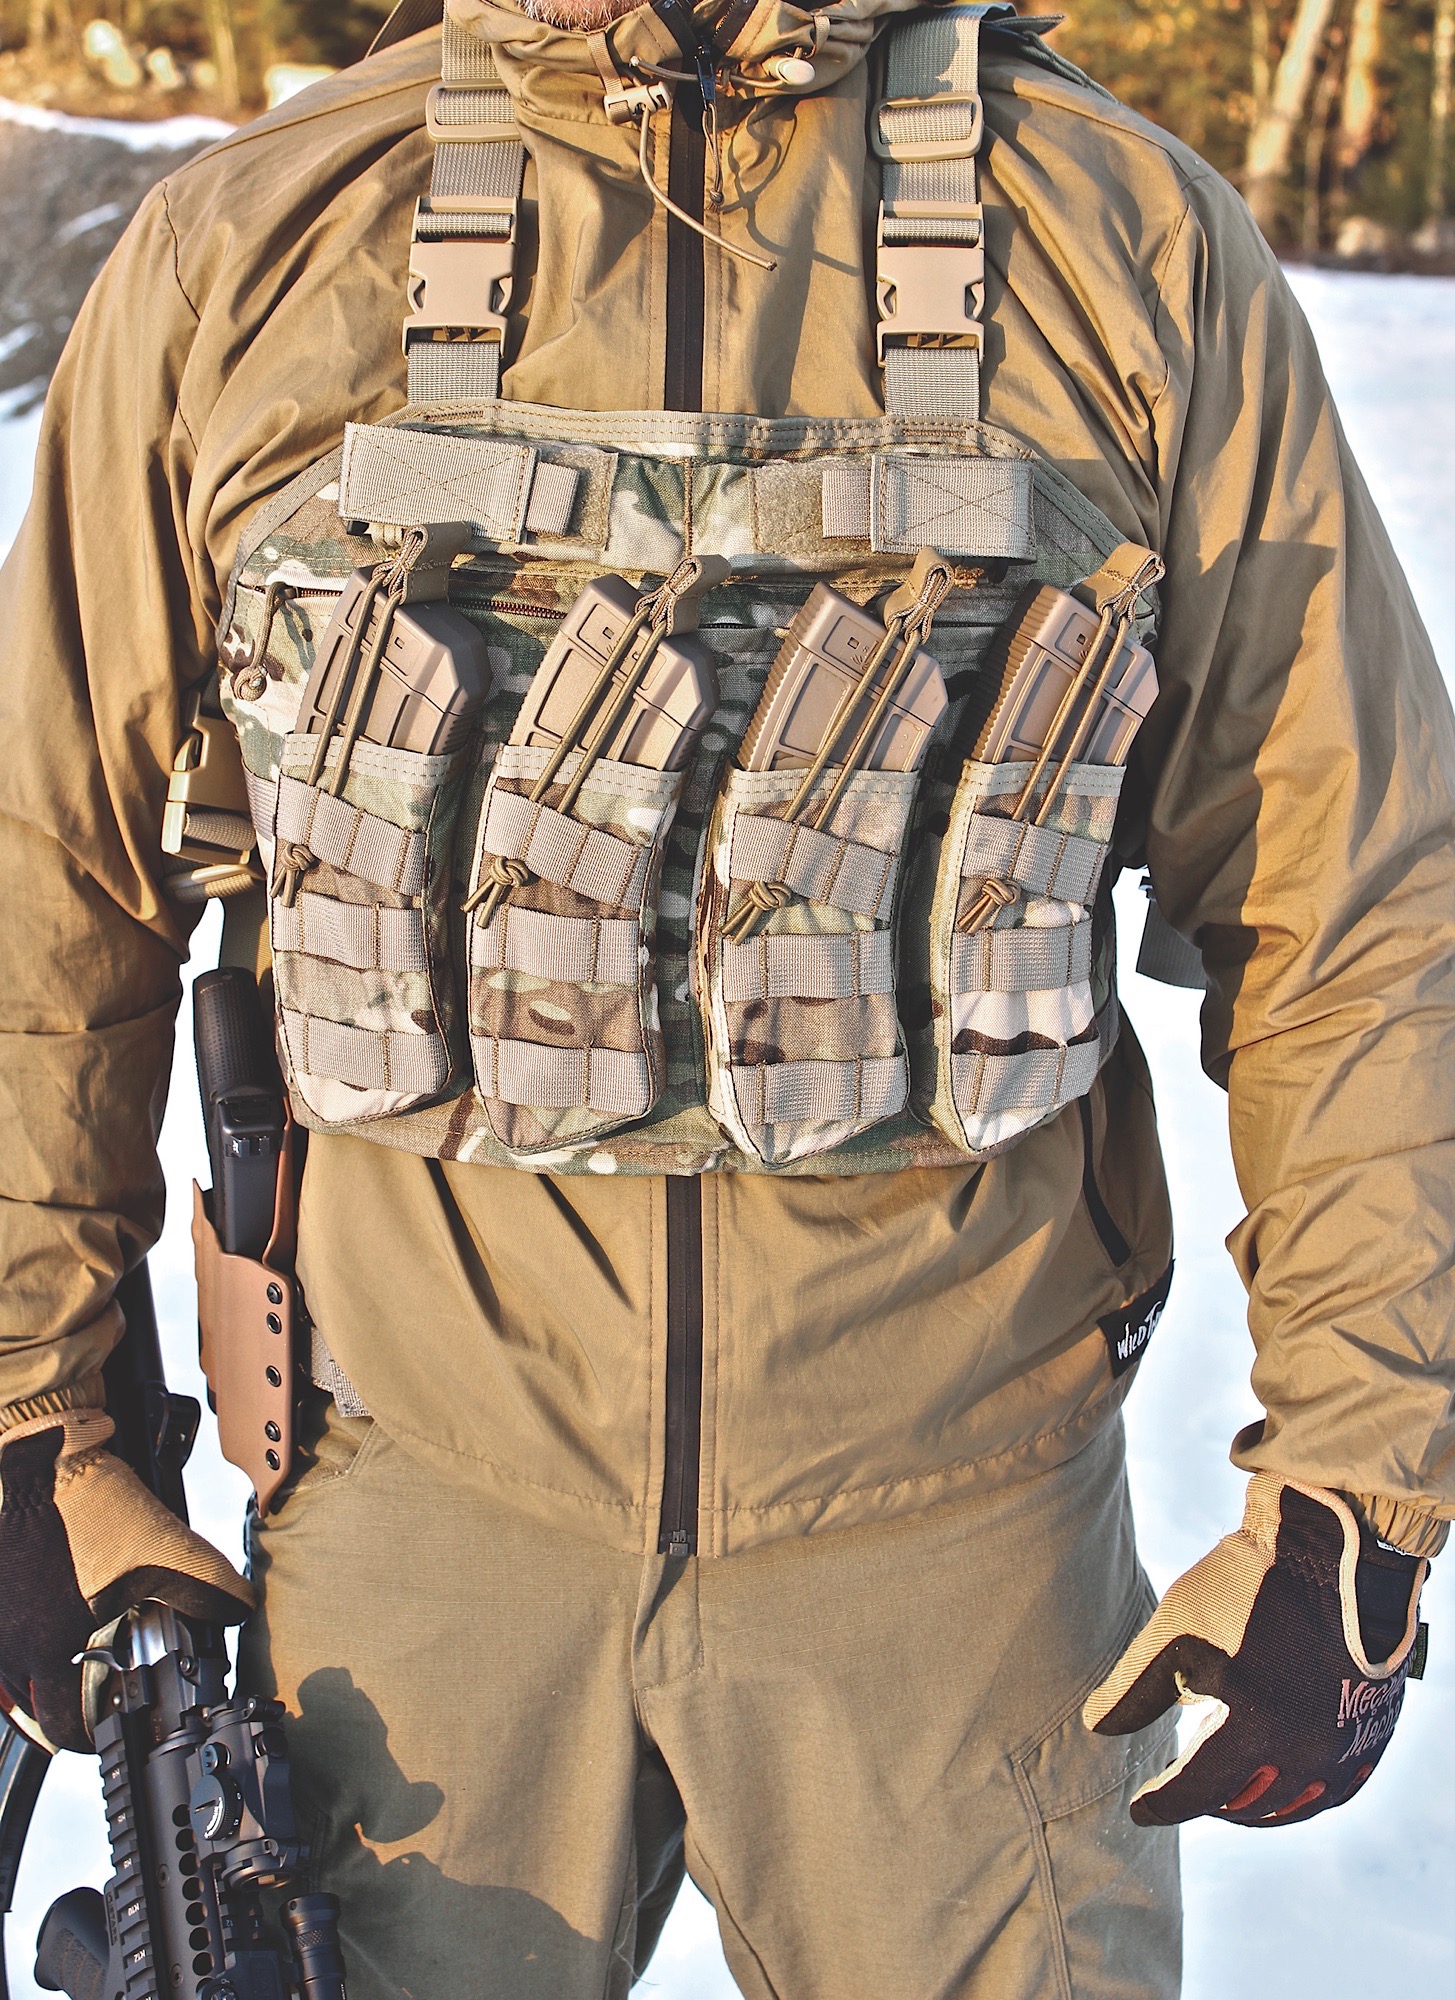 in AK soft goods, and their attacK rack v2 chest rig should be conSidered a...